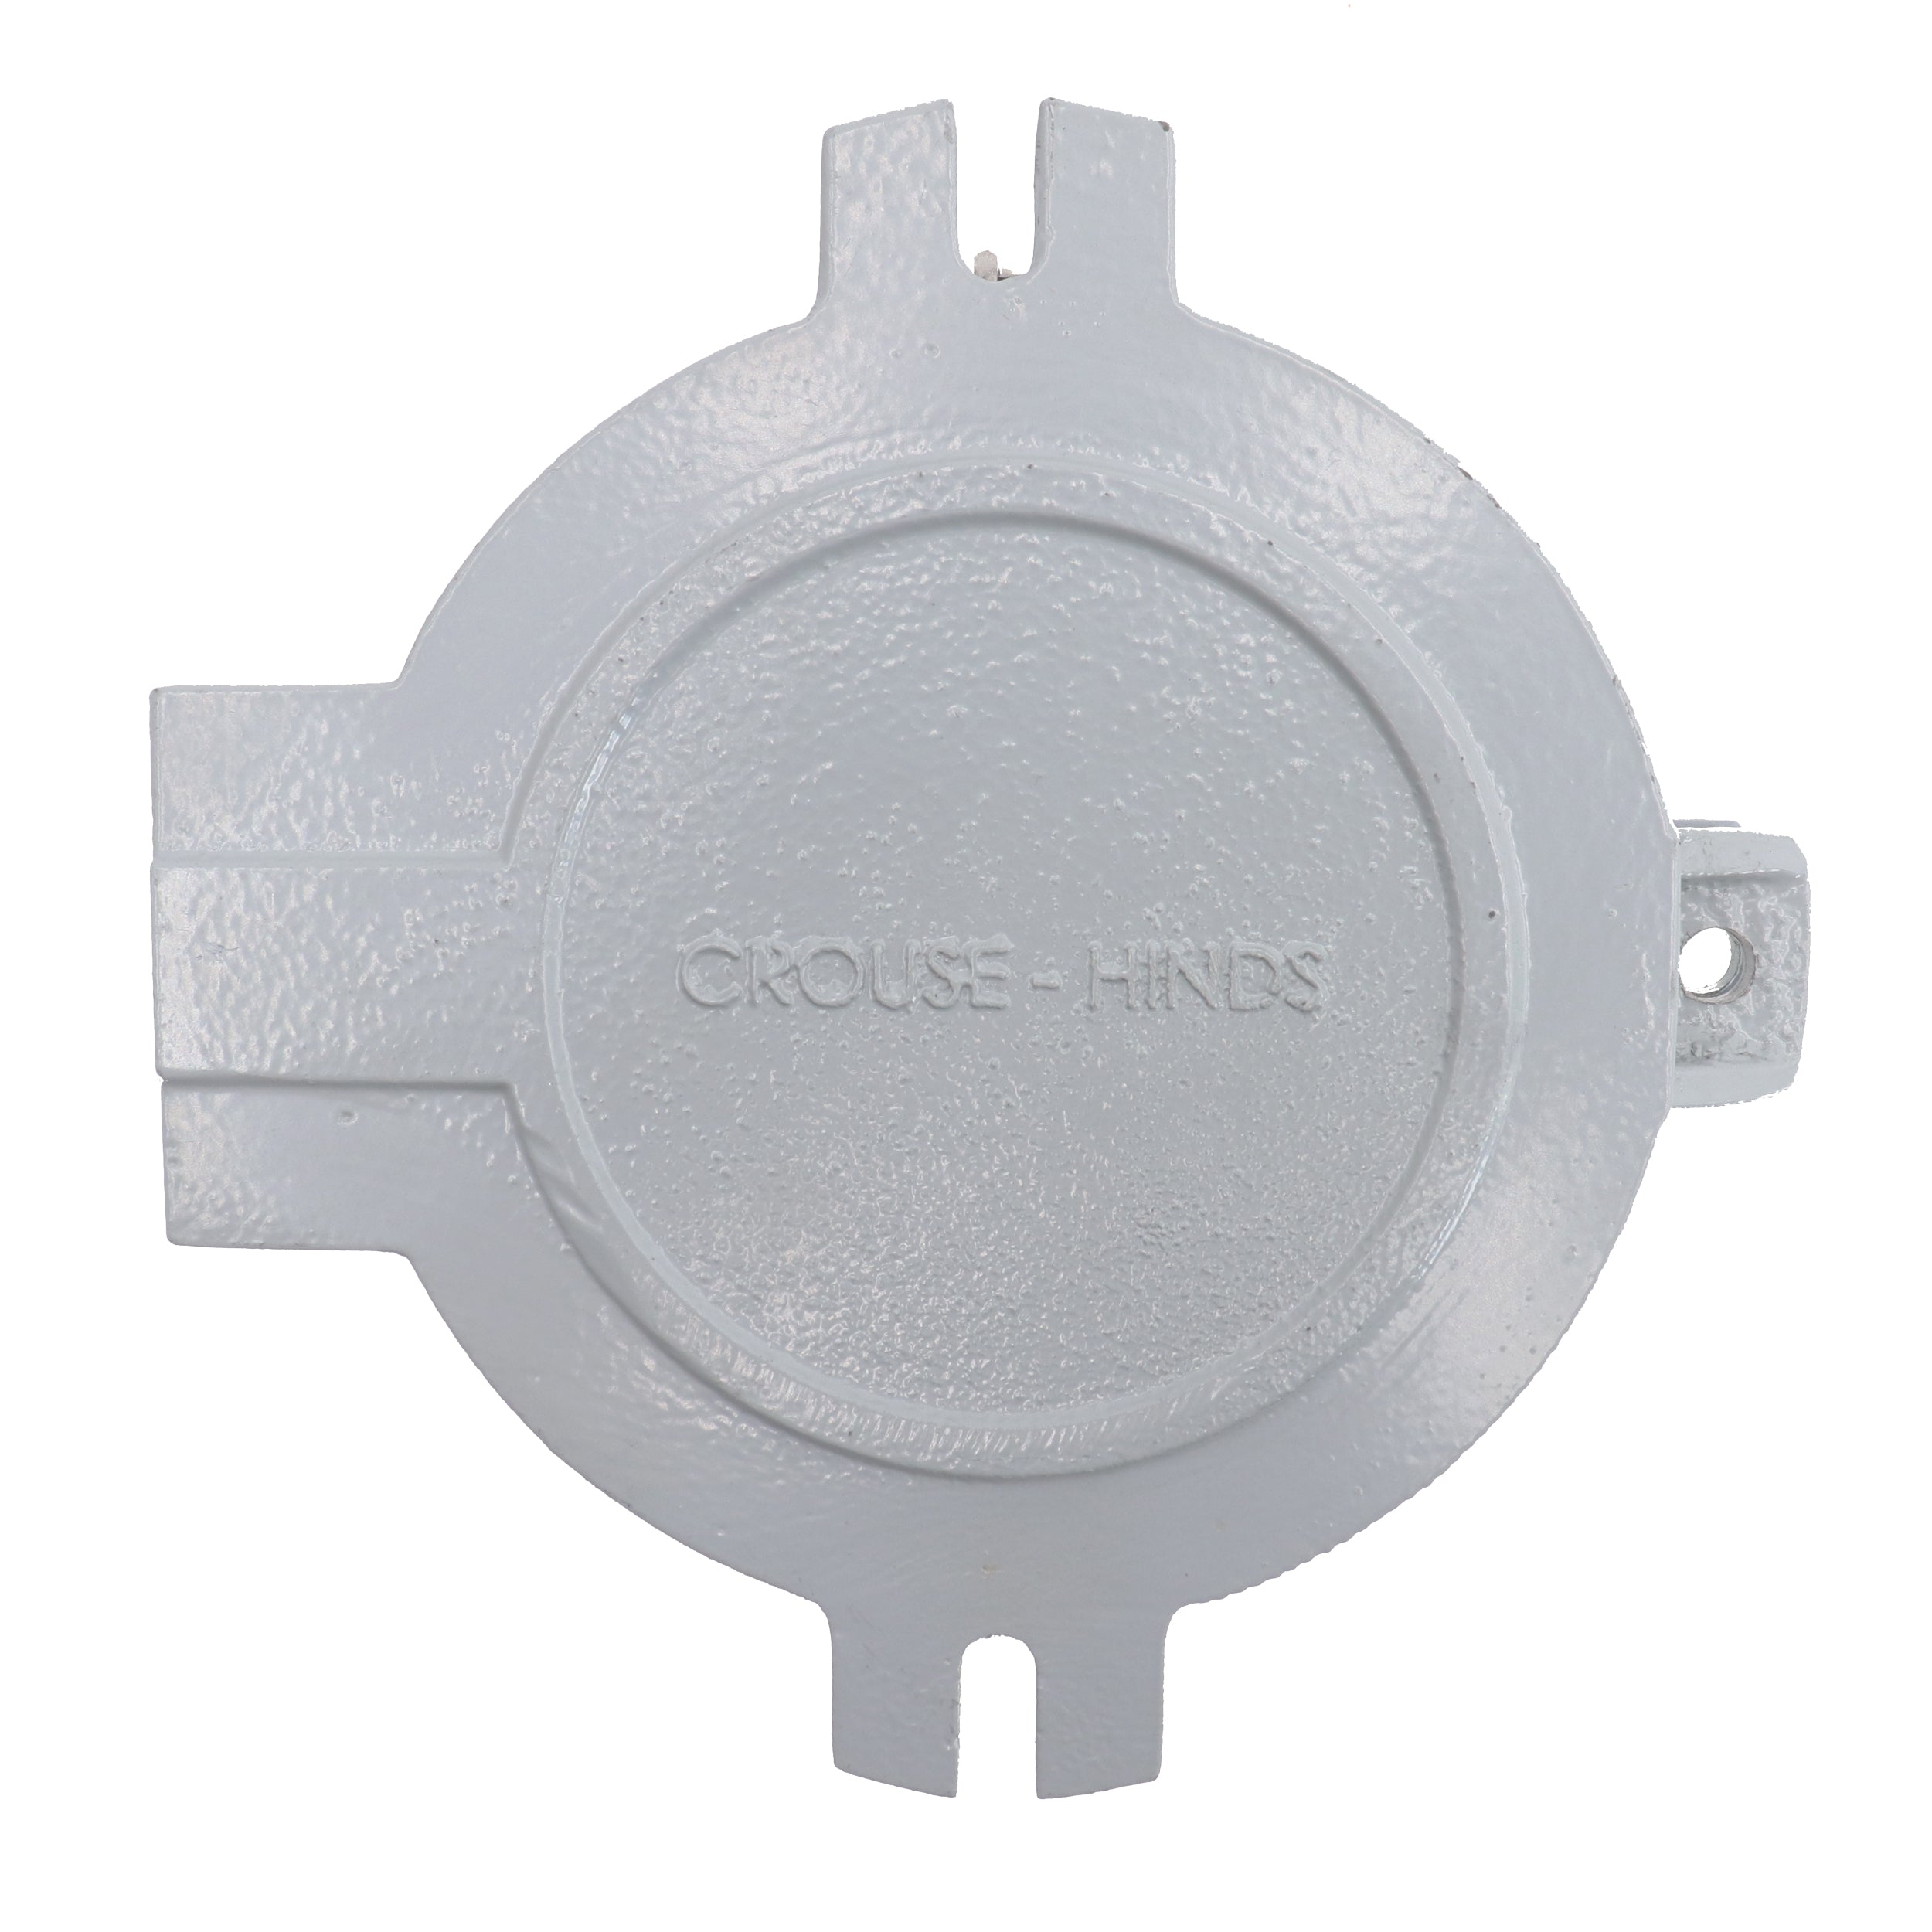 Crouse Hinds, CROUSE-HINDS CDR20044-RS PIN & SLEEVE RECEPTACLE, NEMA 4X, 600VAC/250VDC, 4-POLE